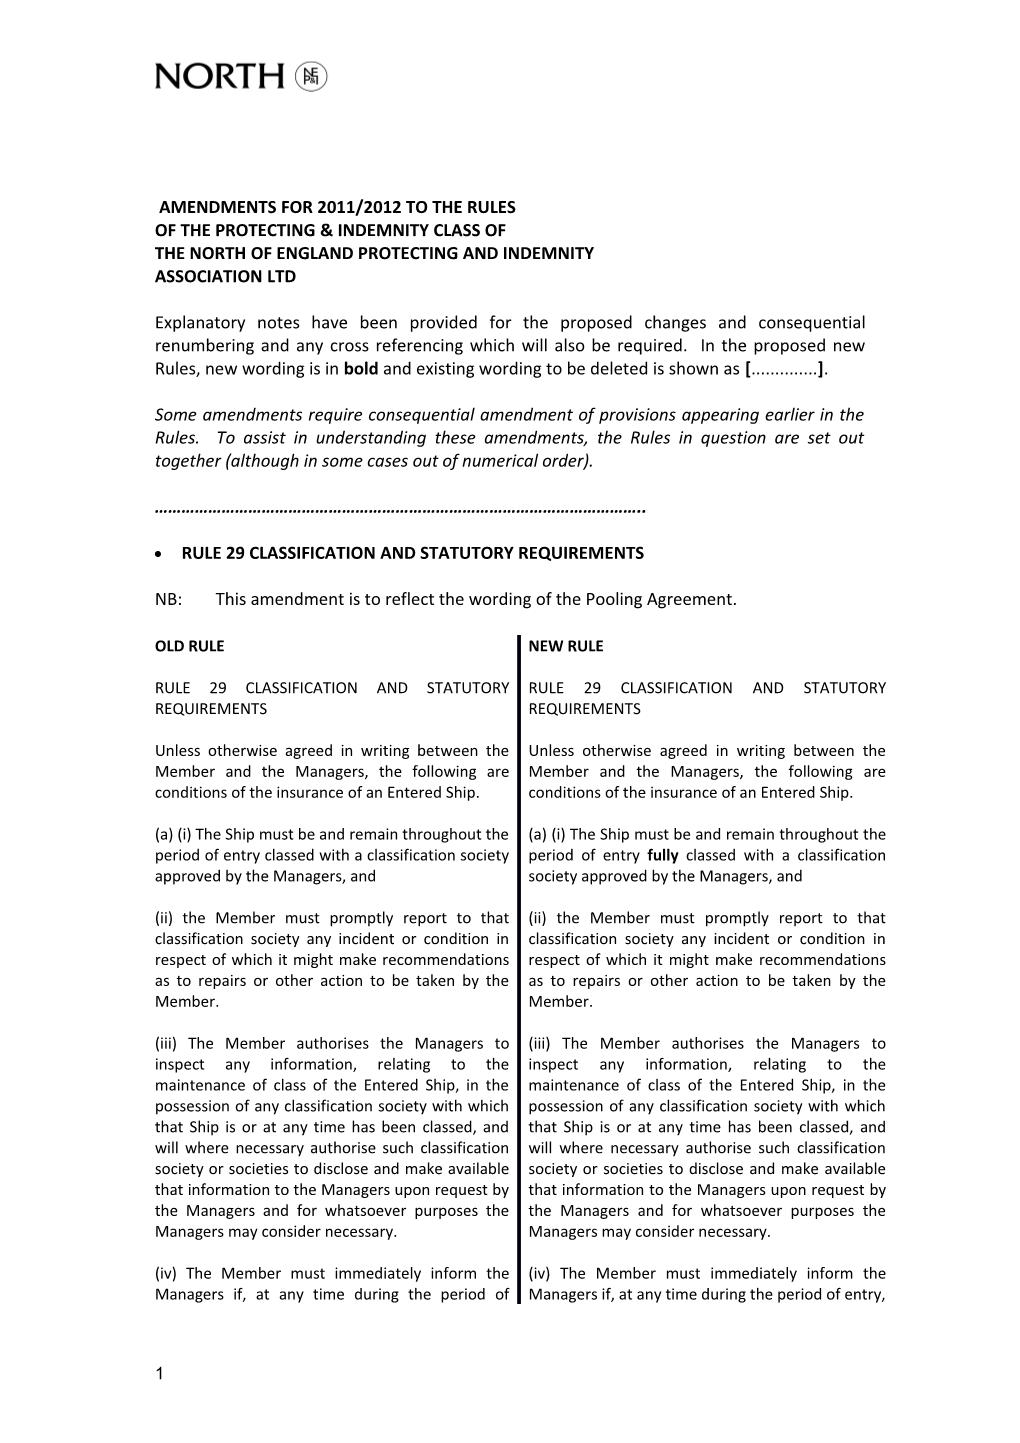 Amendments for 2010/2011 to the Rules